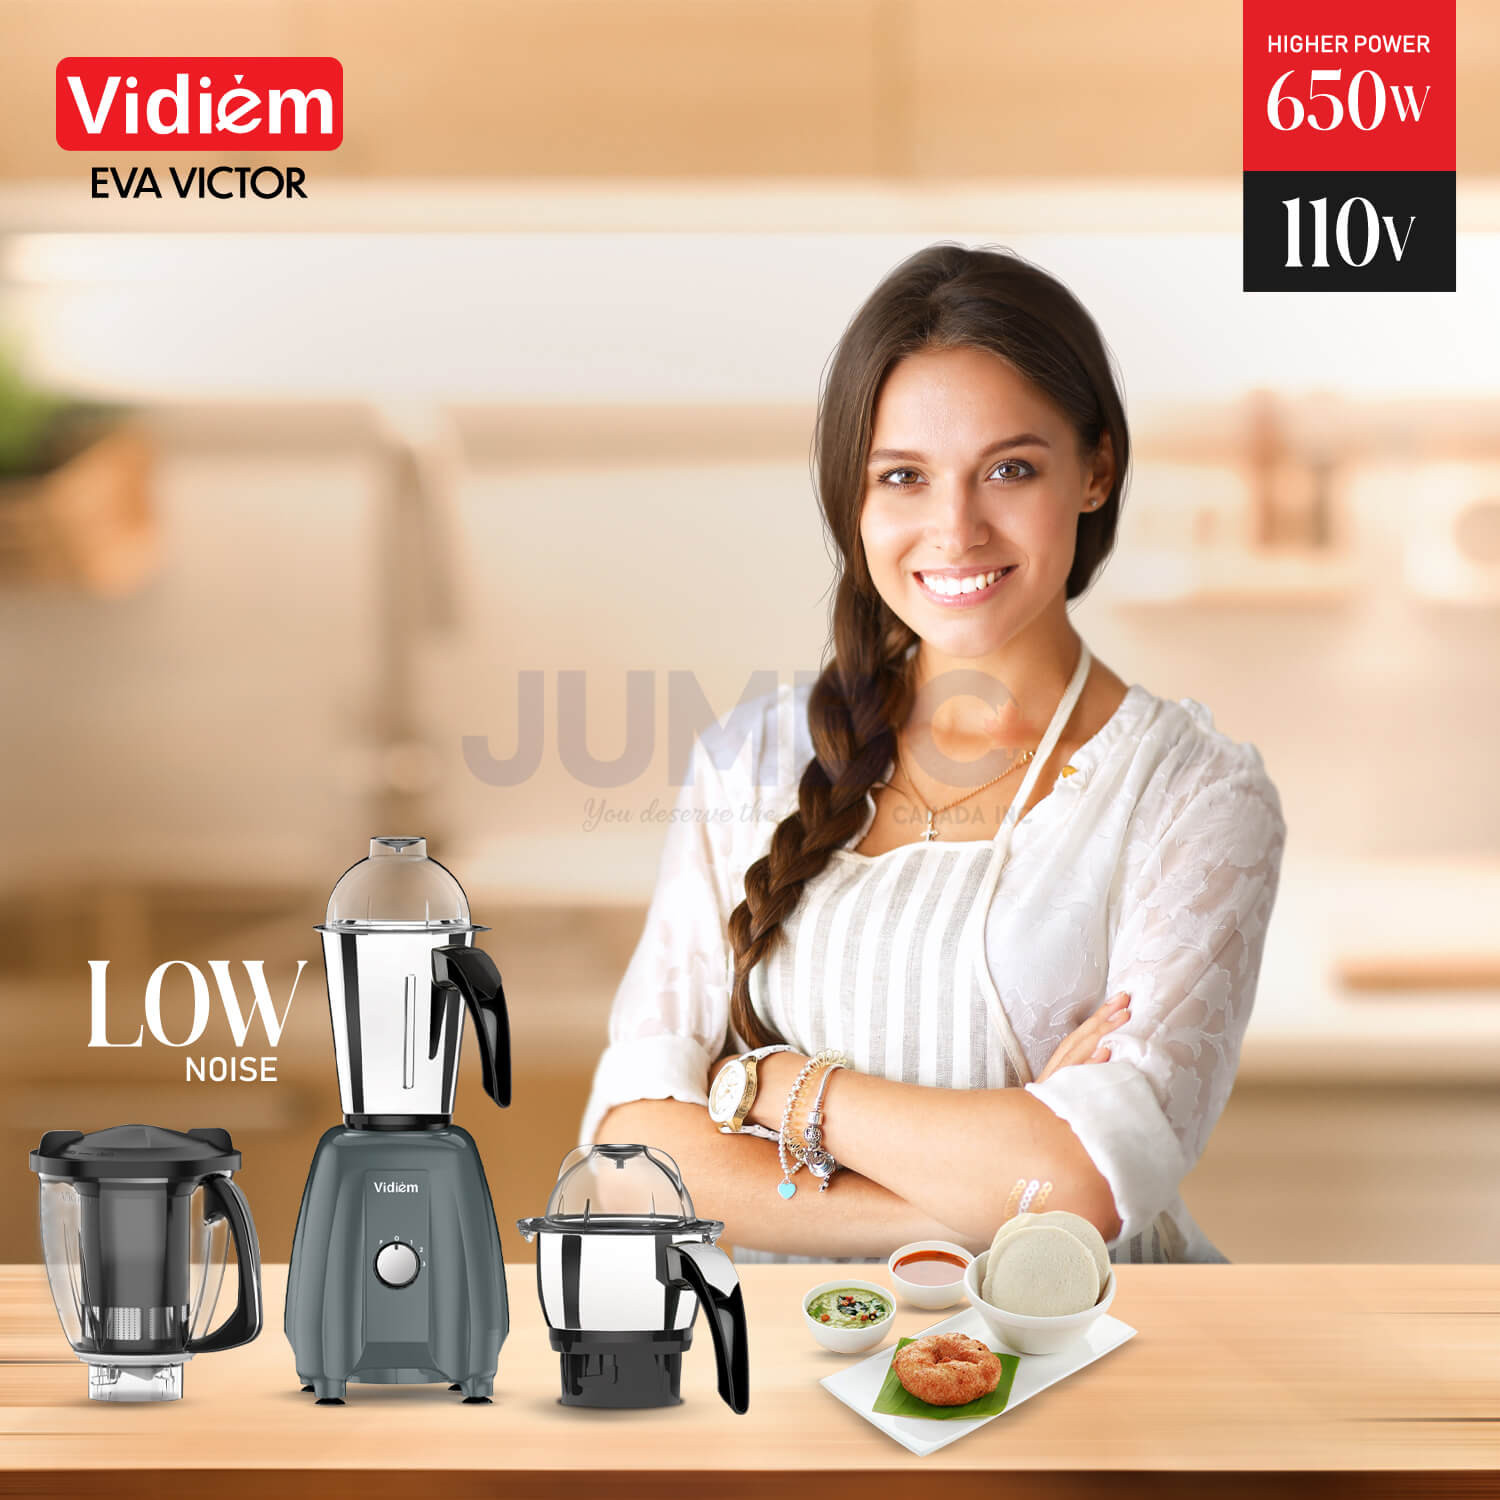 vidiem-eva-victor-650w-110v-stainless-steel-jars-indian-mixer-grinder-spice-coffee-grinder-with-almond-nut-milk-juice-extractor-for-use-in-canada-usa3